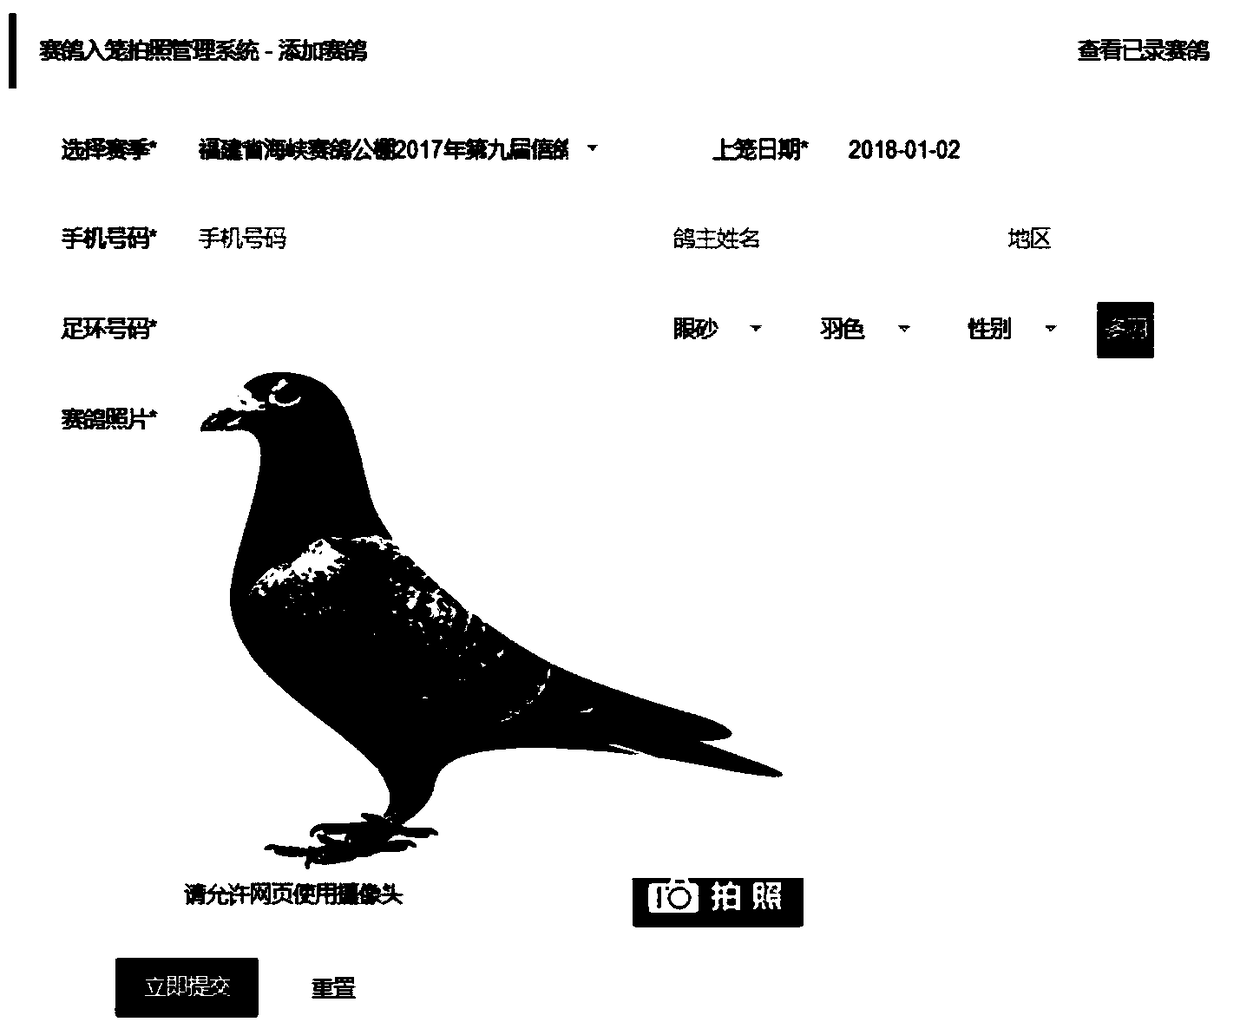 Online photographing and synthesizing system for homing pigeons into cage